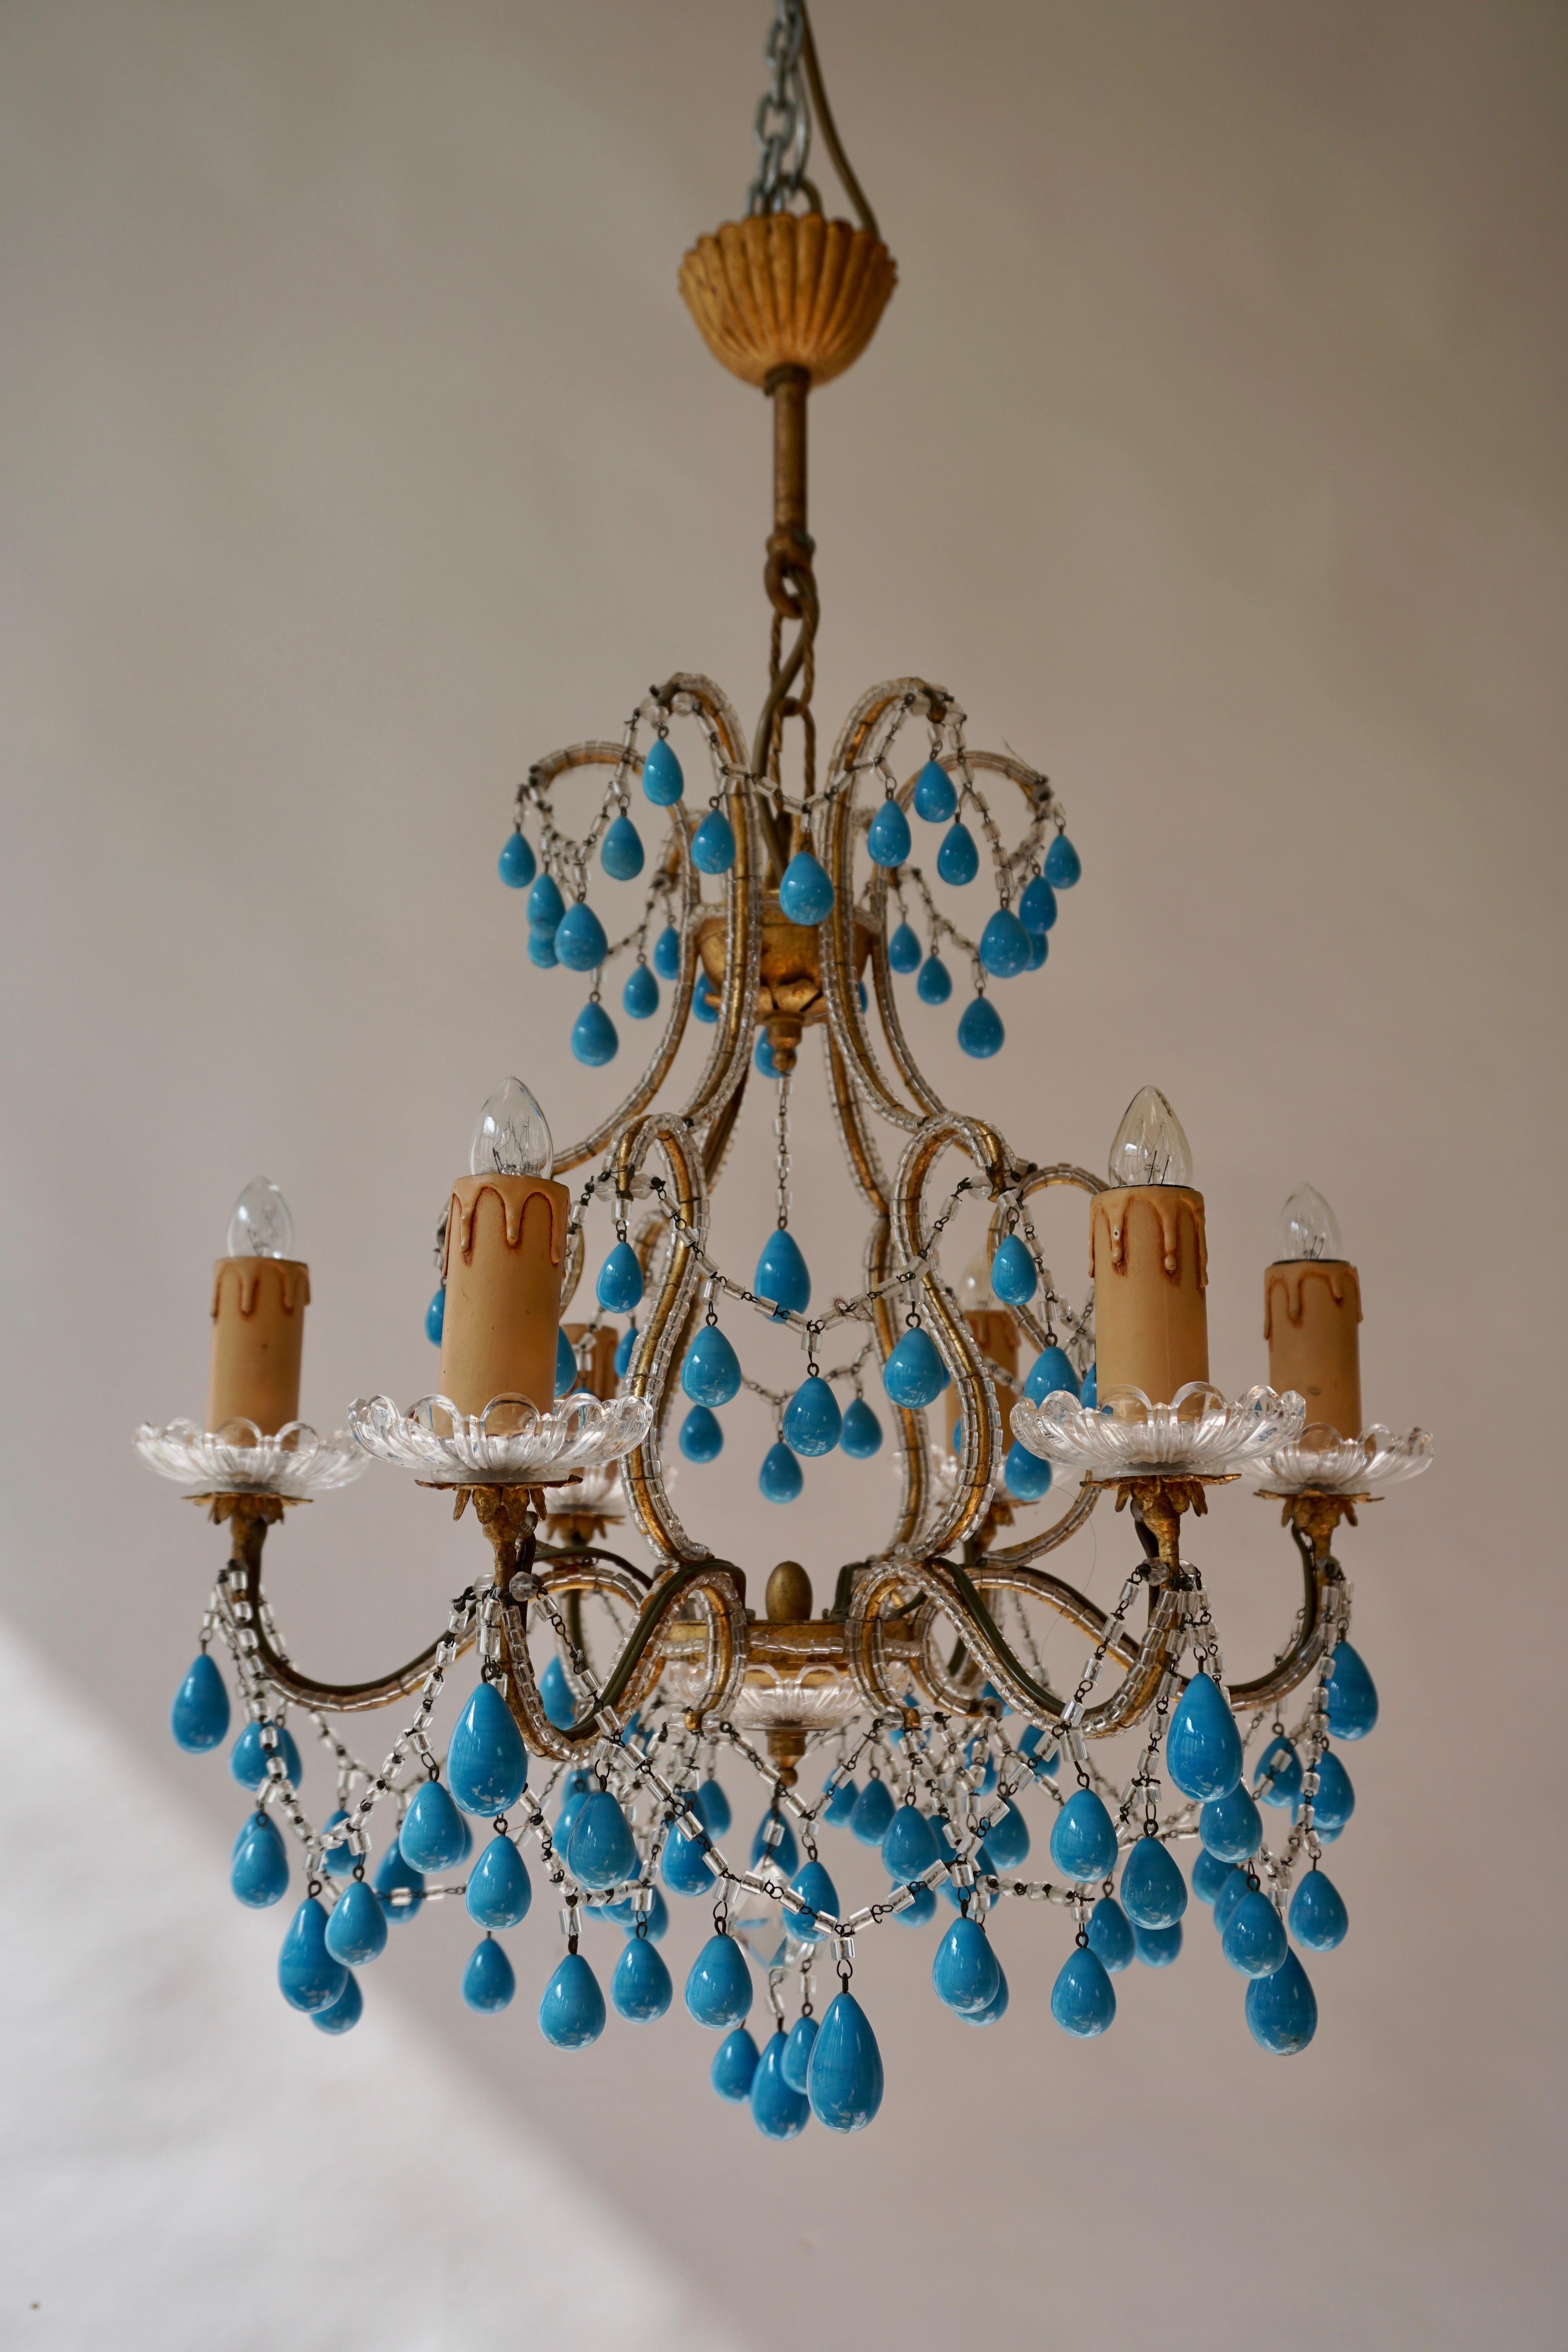 Two six-arm chandeliers with blue stone drops.
Measures:
Diameter 45 cm.
Height fixture 45 cm.
Total height 65 cm.
Six E14 bulbs.